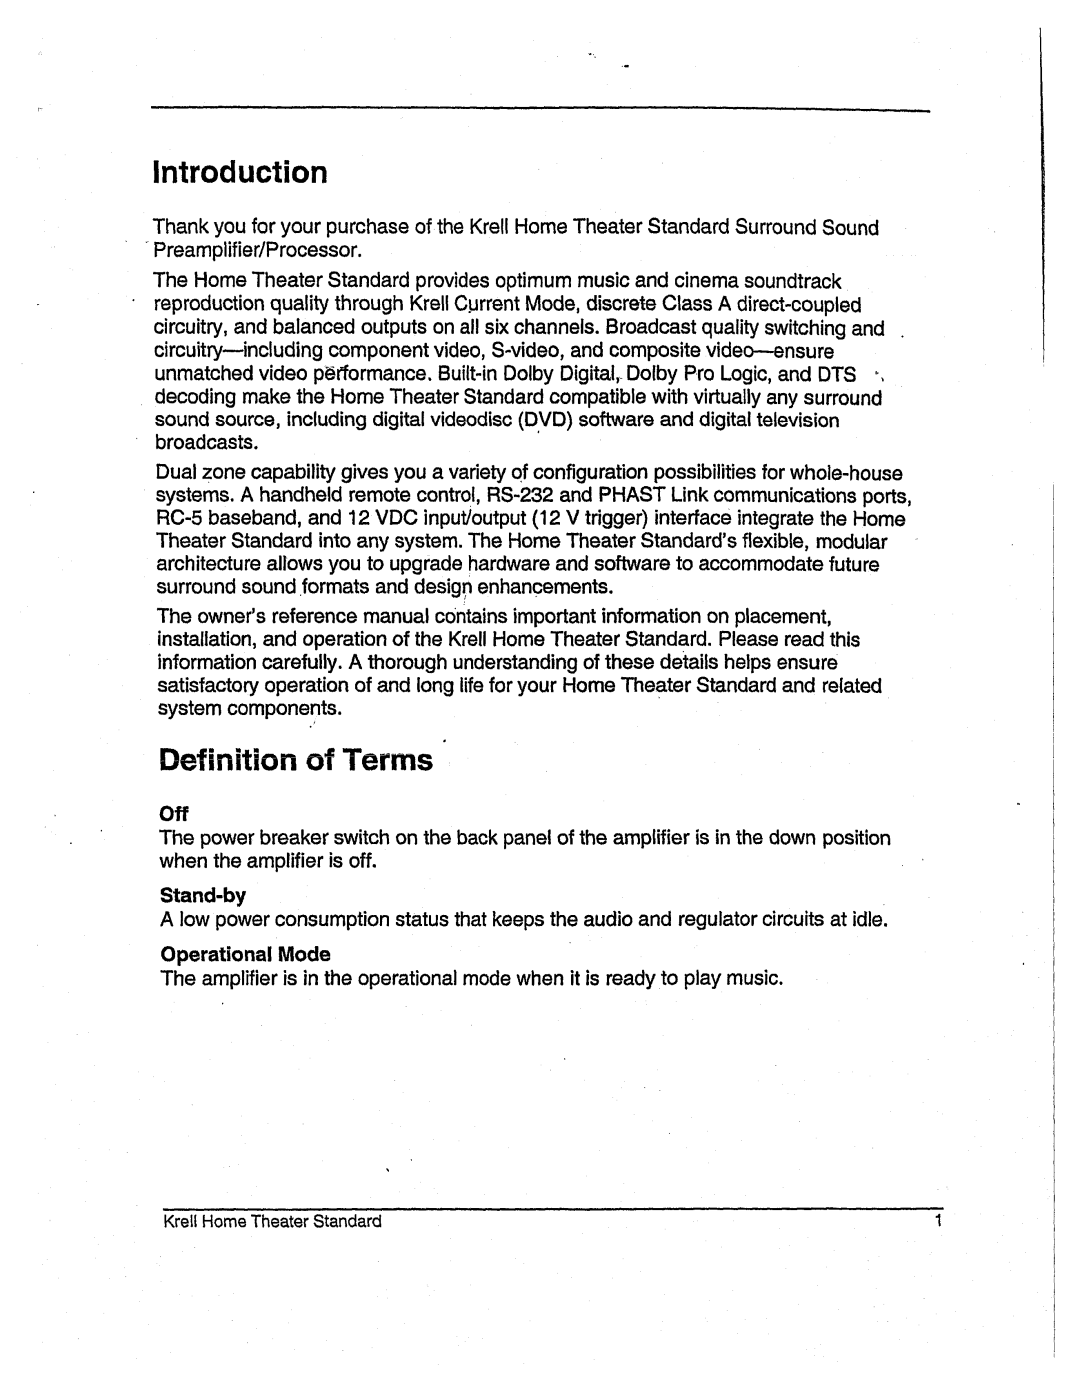 Krell Industries None manual Introduction, Definition of Terms, Operational Mode 